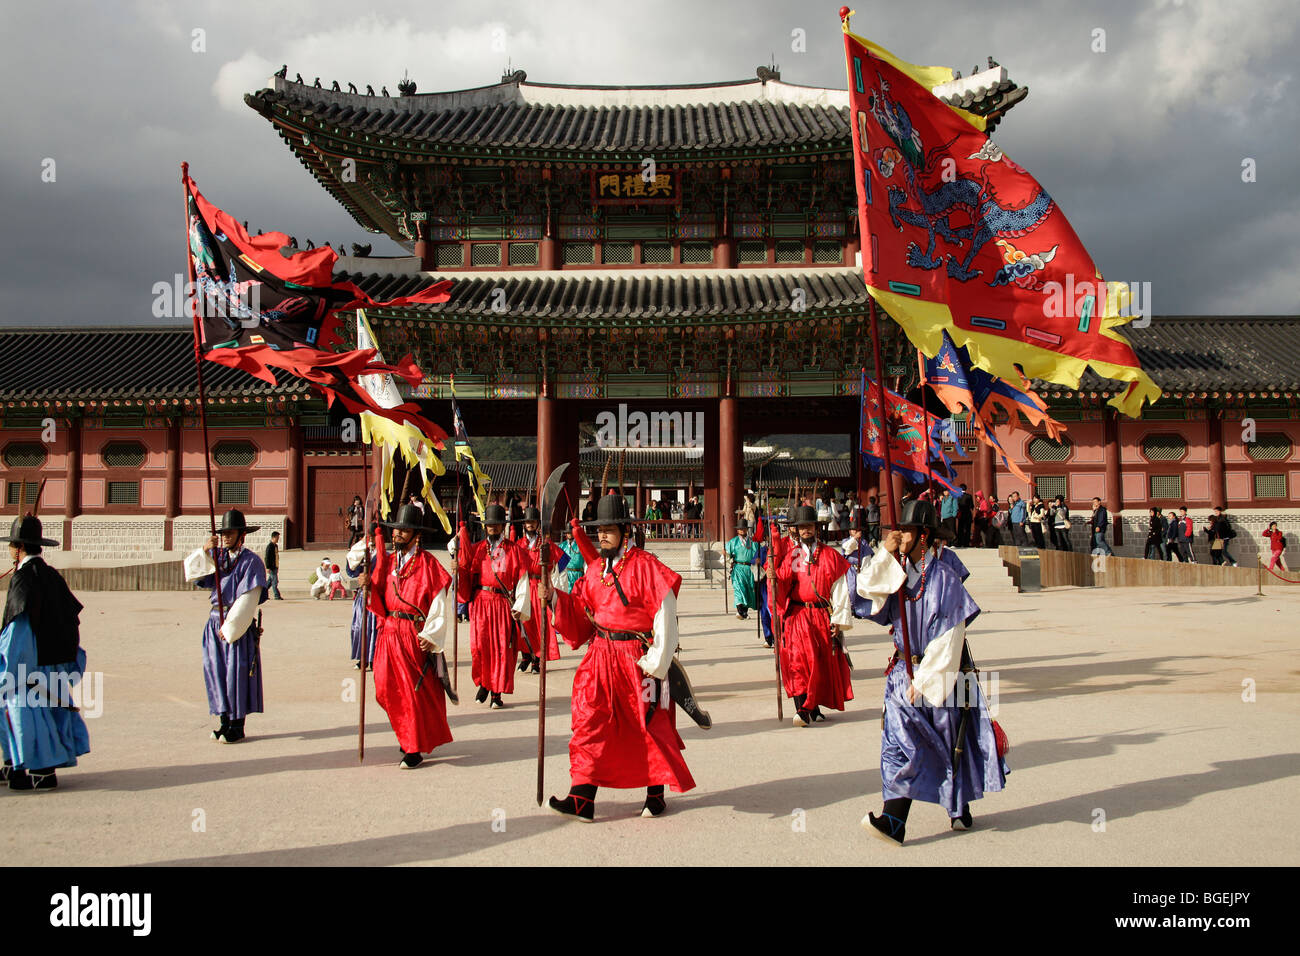 The changing of the guard ceremony at Gyeongbokgung Palace in South Koreas Capital Seoul, Asia Stock Photo